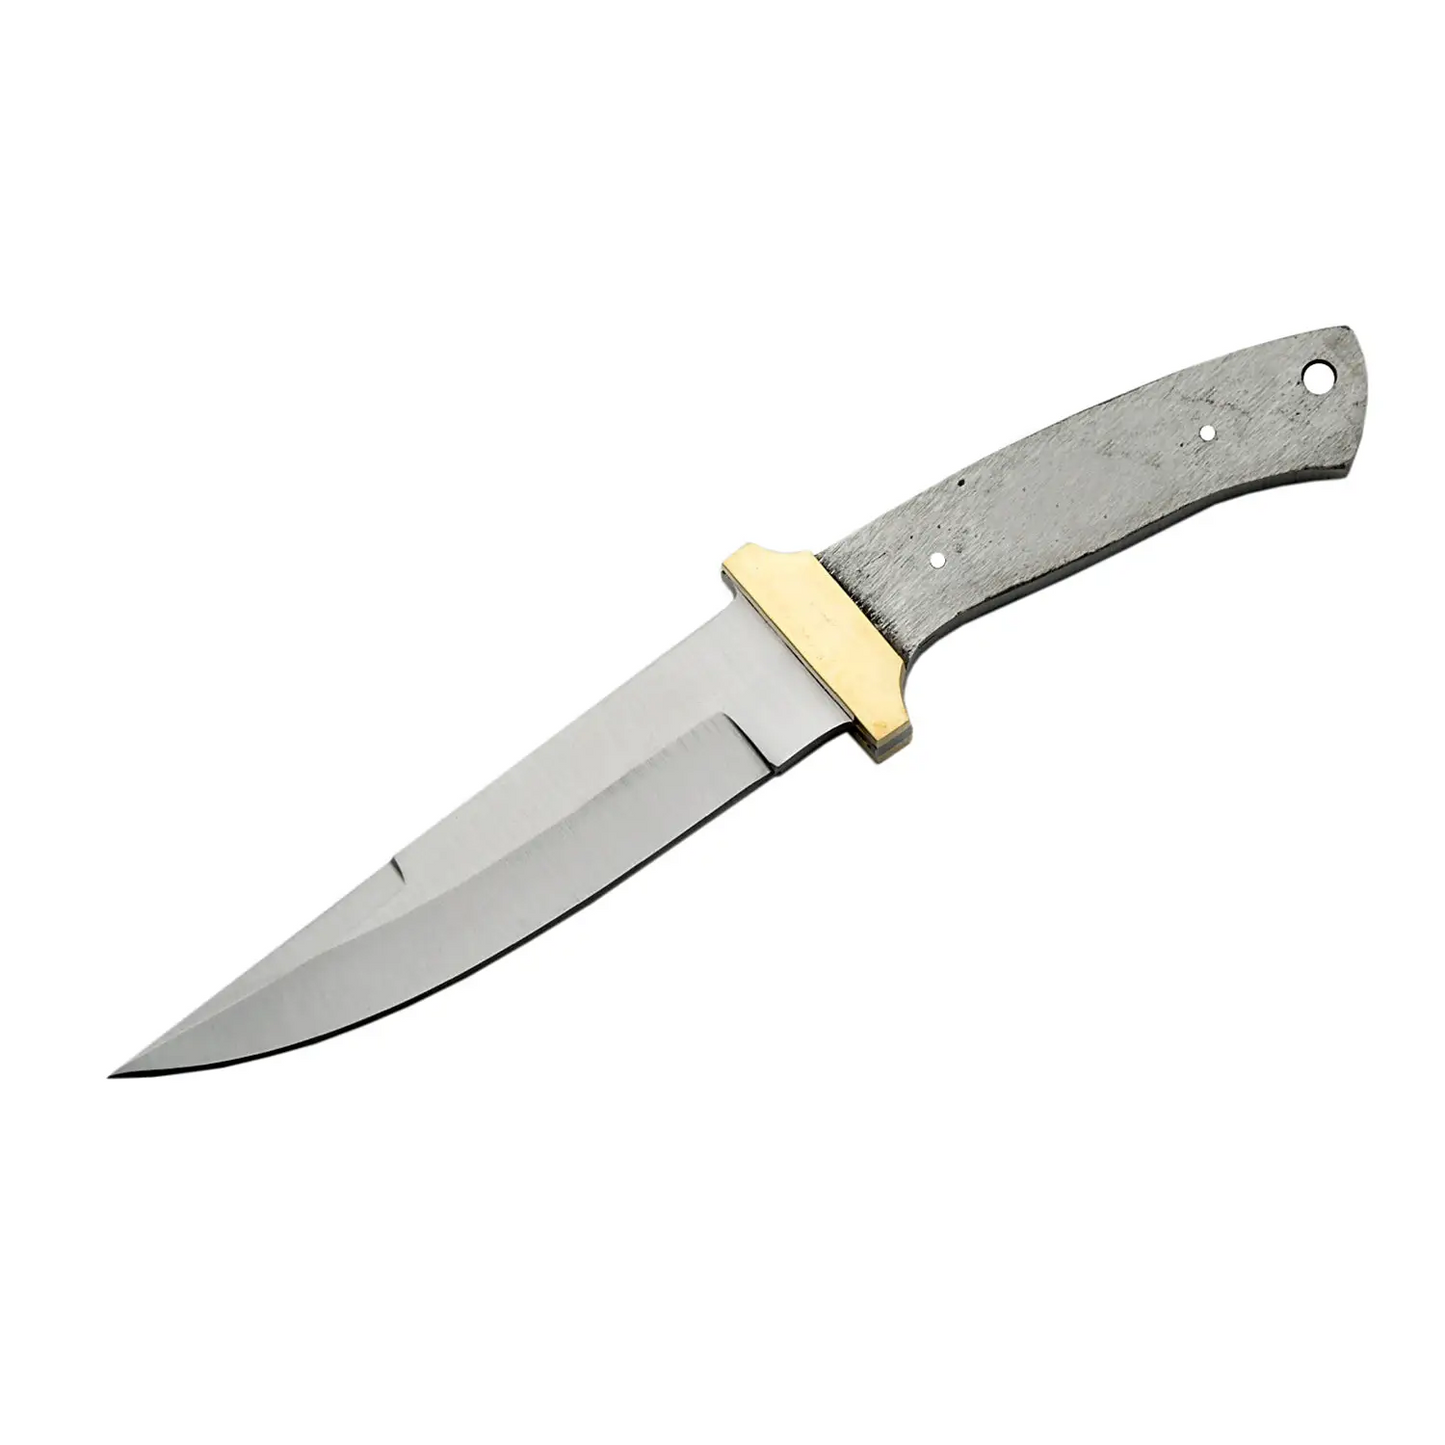 Exclusive 10 Swedged Bowie Blade with Brass Guard Hunting